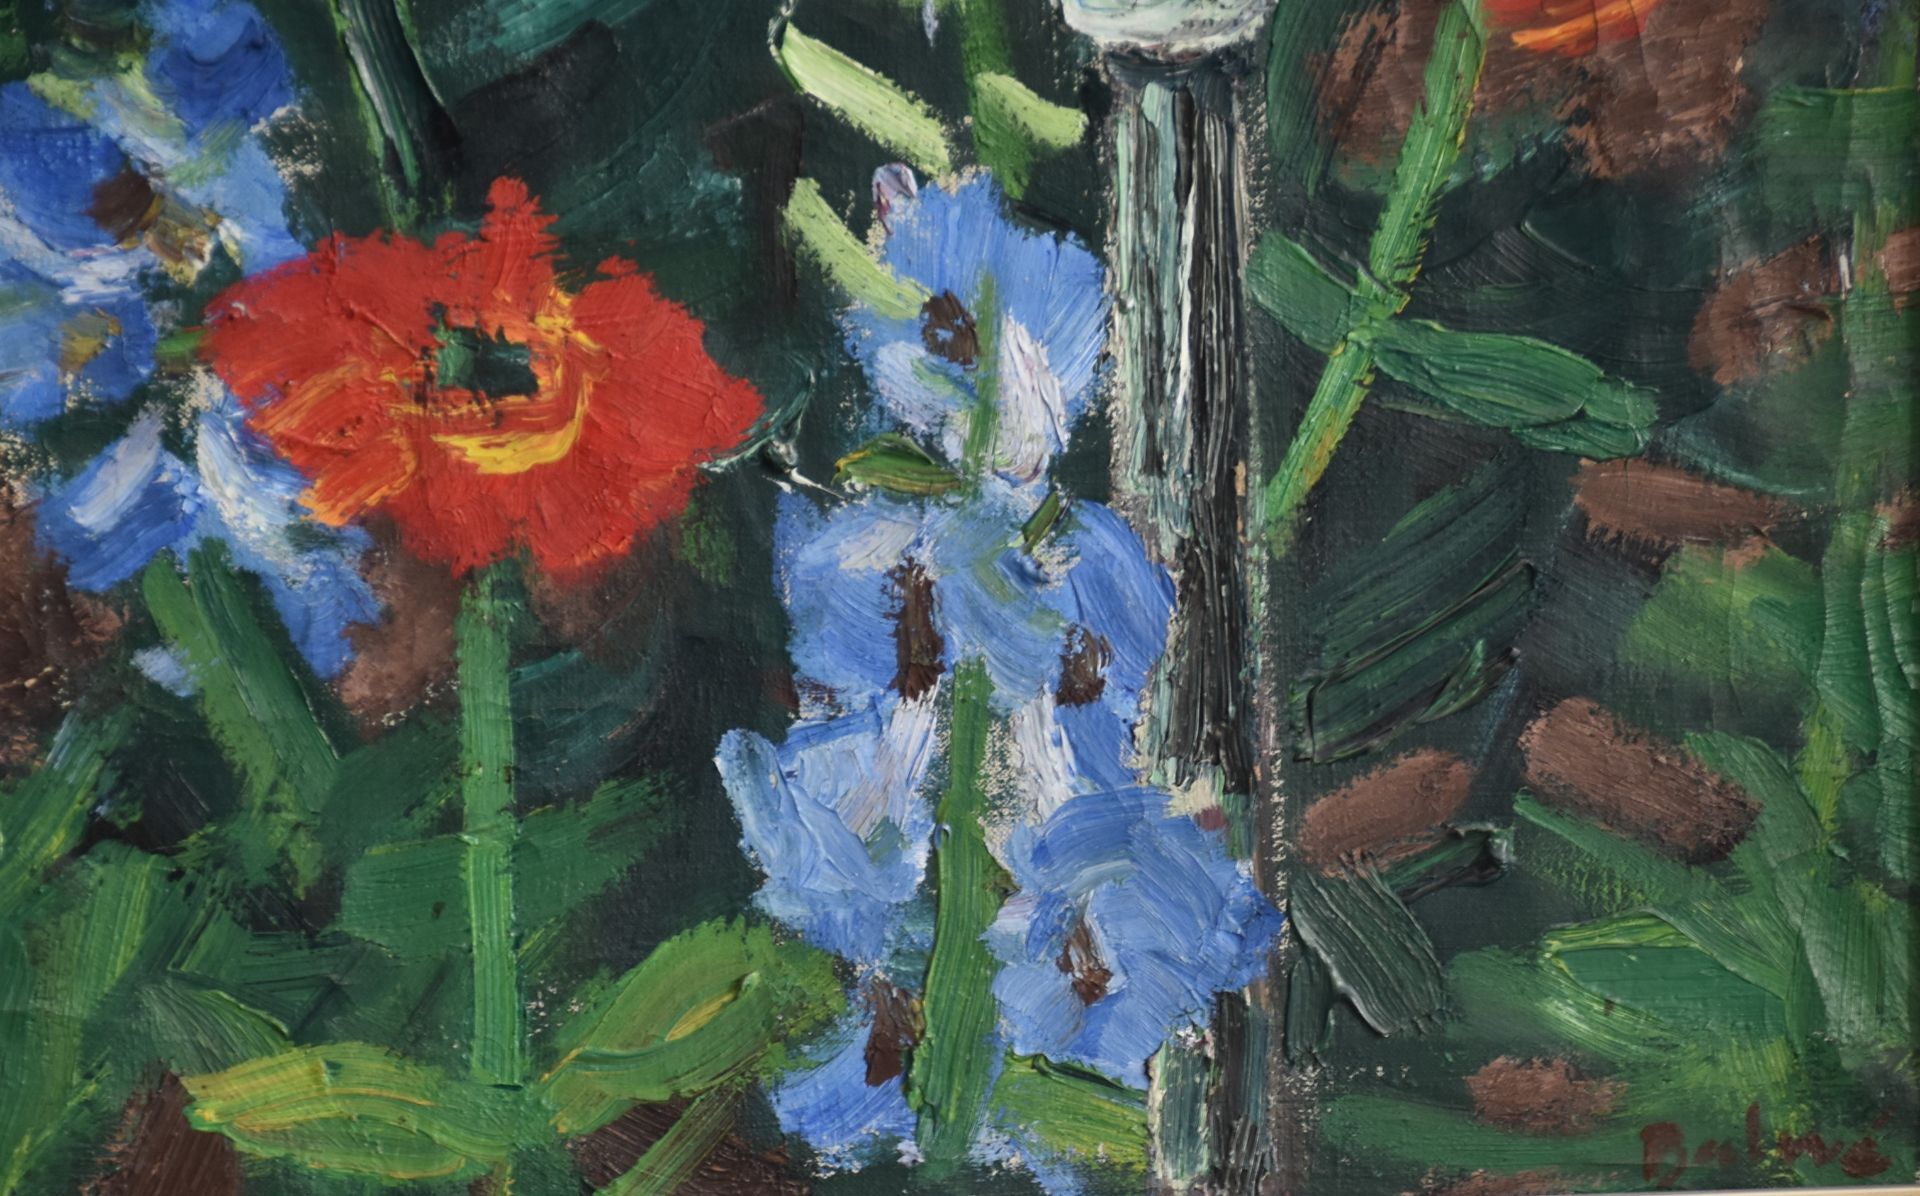 Arnold BALWE (1898-1983) Oil on canvas. The delphiniums at the entrance of the garden. Resale rights - Image 3 of 4